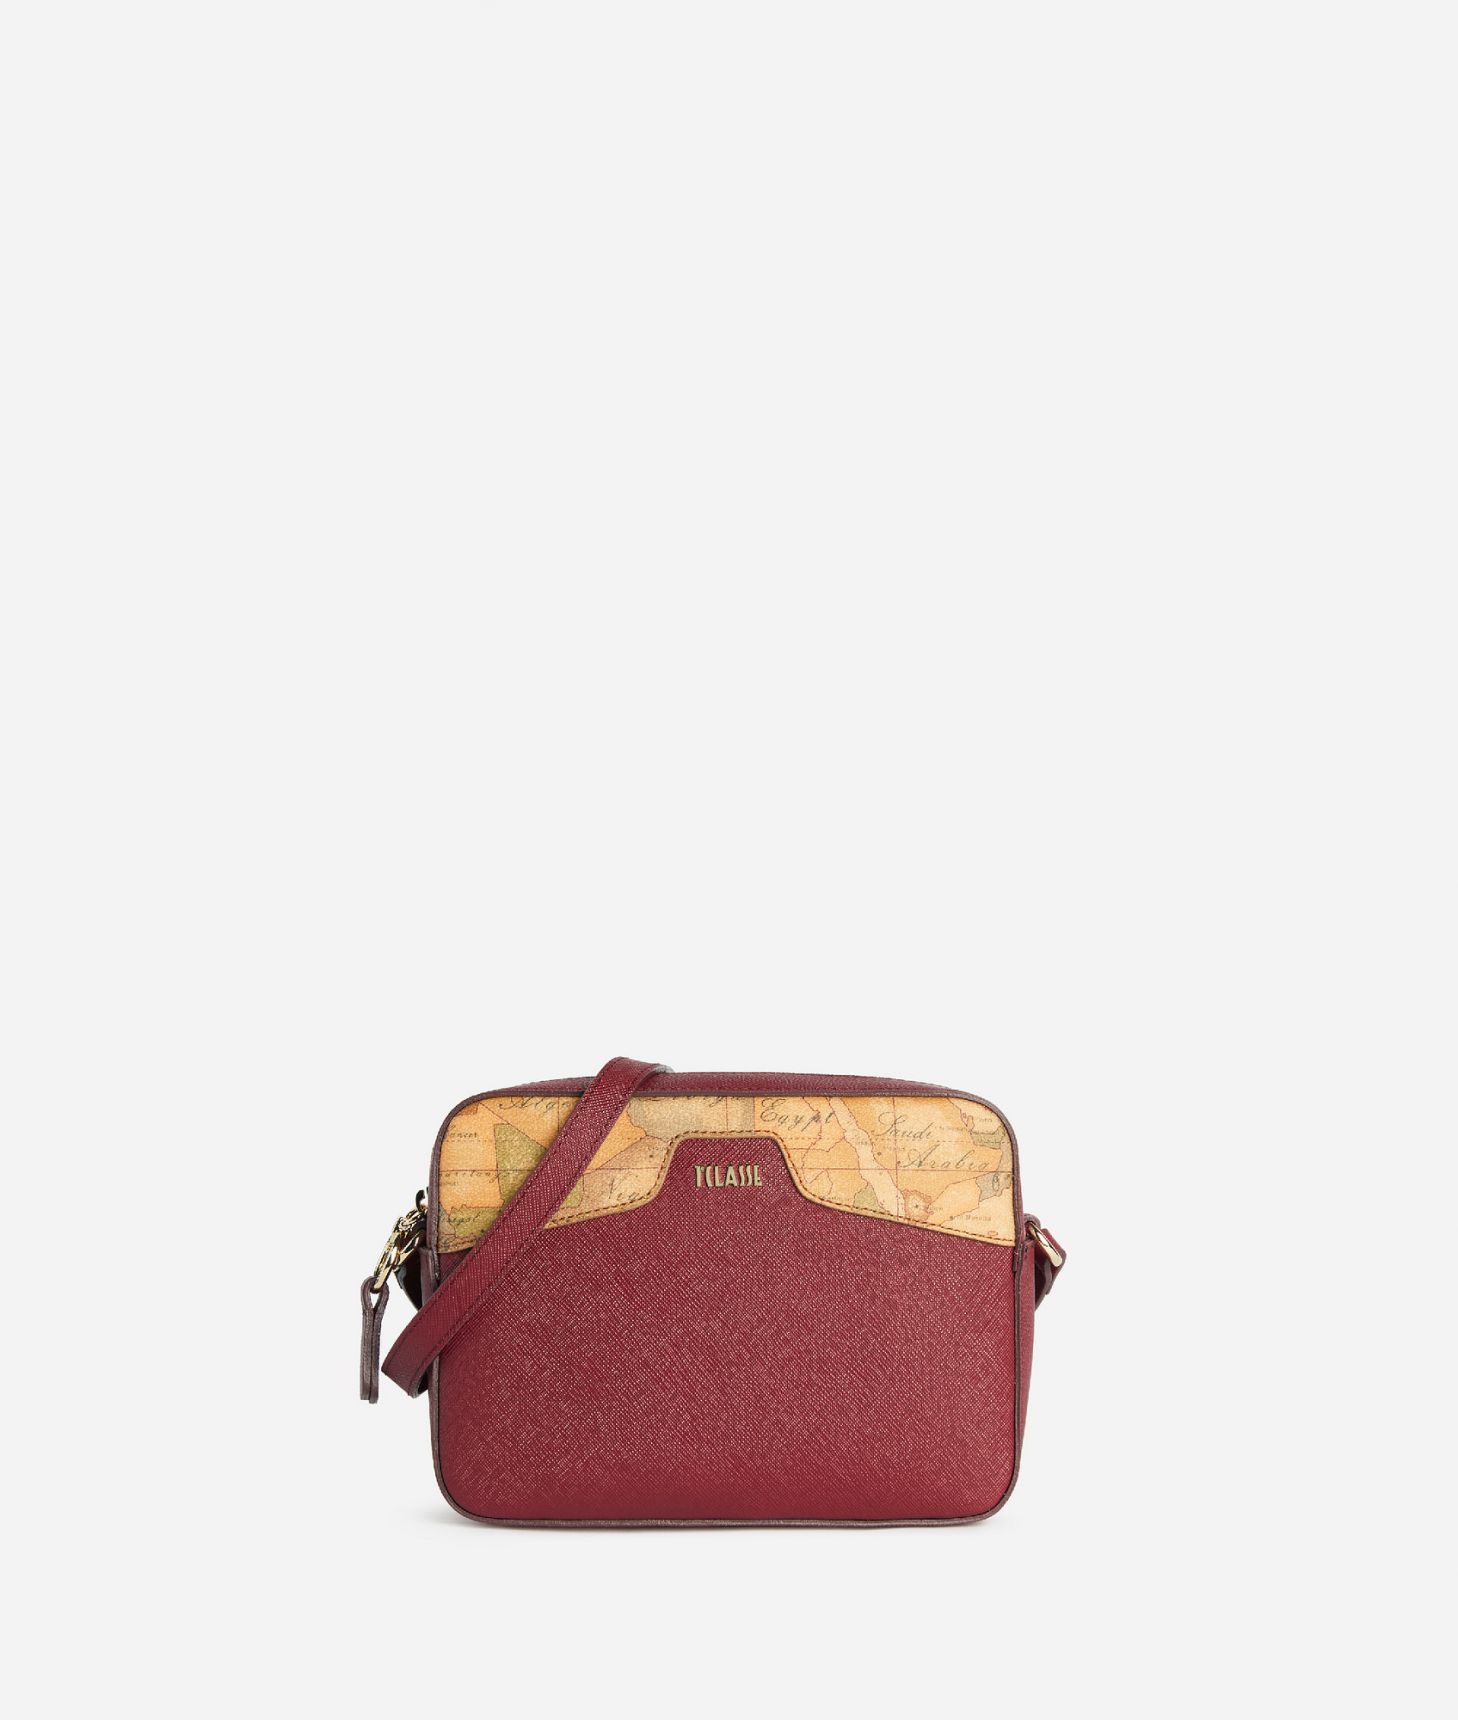 Glam City small reporter bag Cabernet,front